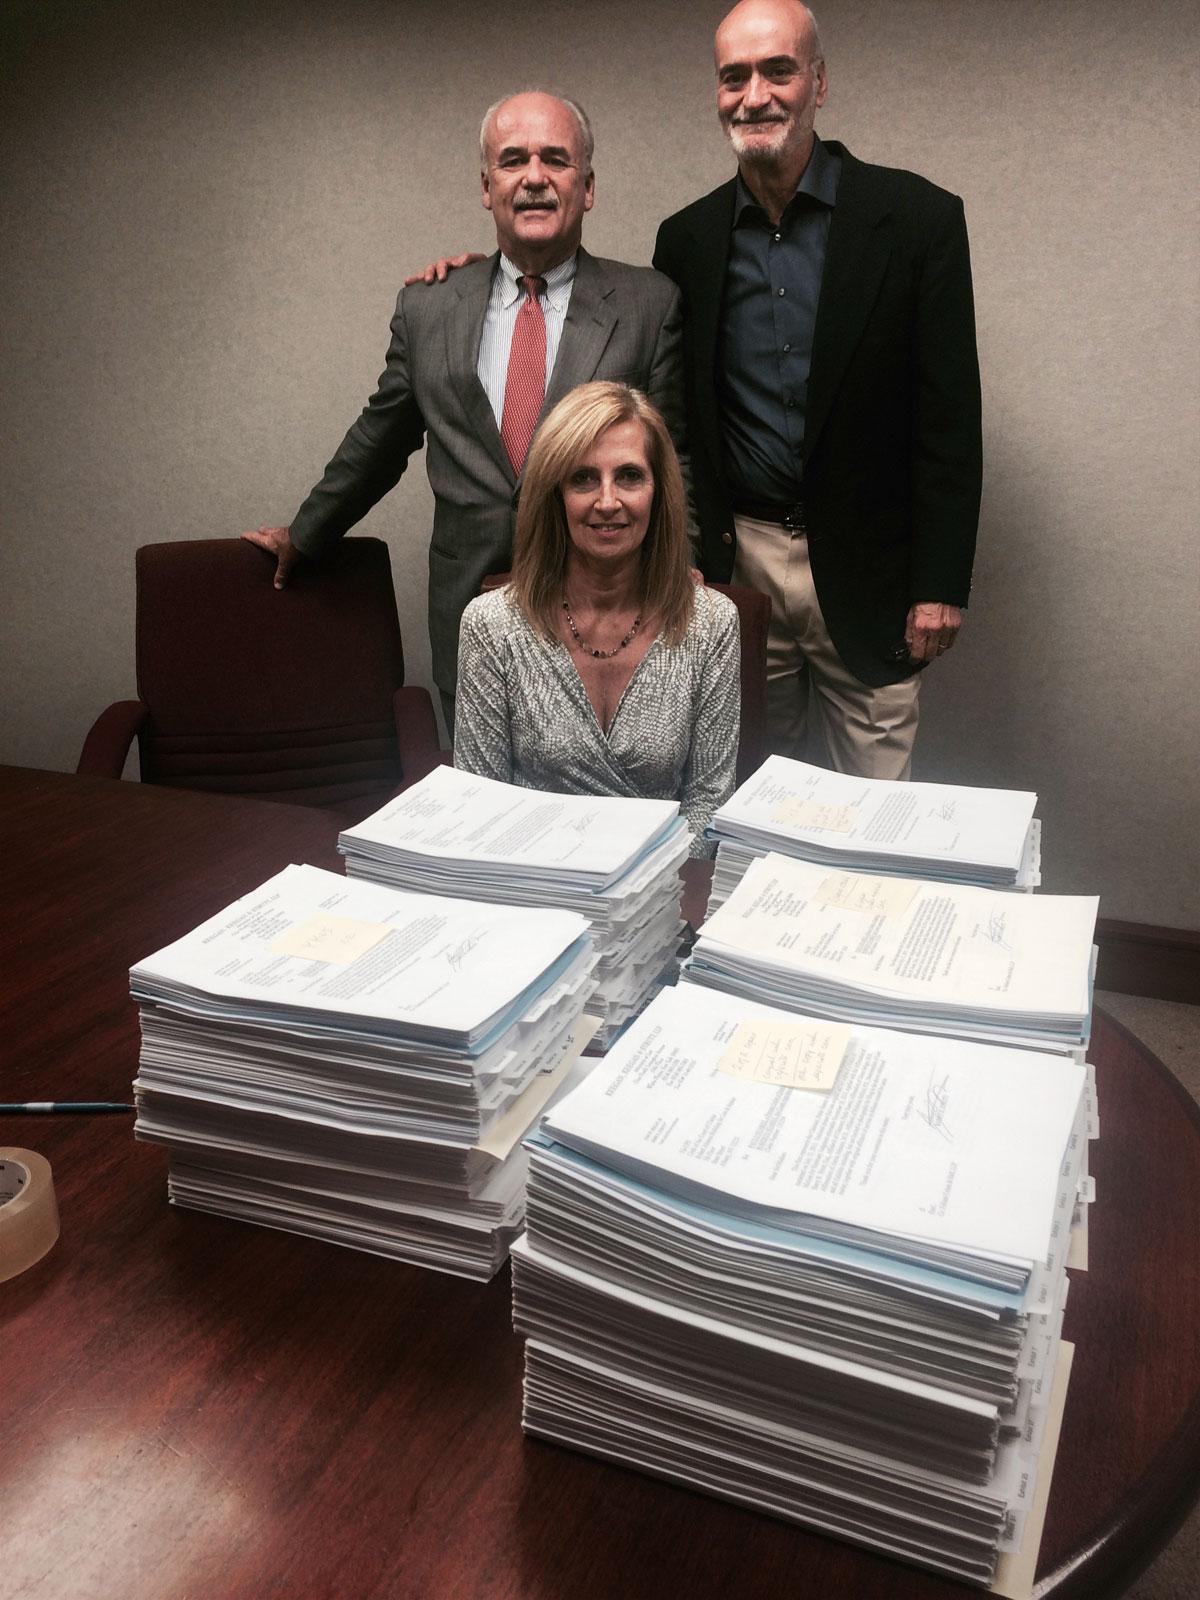 White Plains personal injury lawyers, John Keegan and Barry Strutt with their legal assistant, Lisa Logel